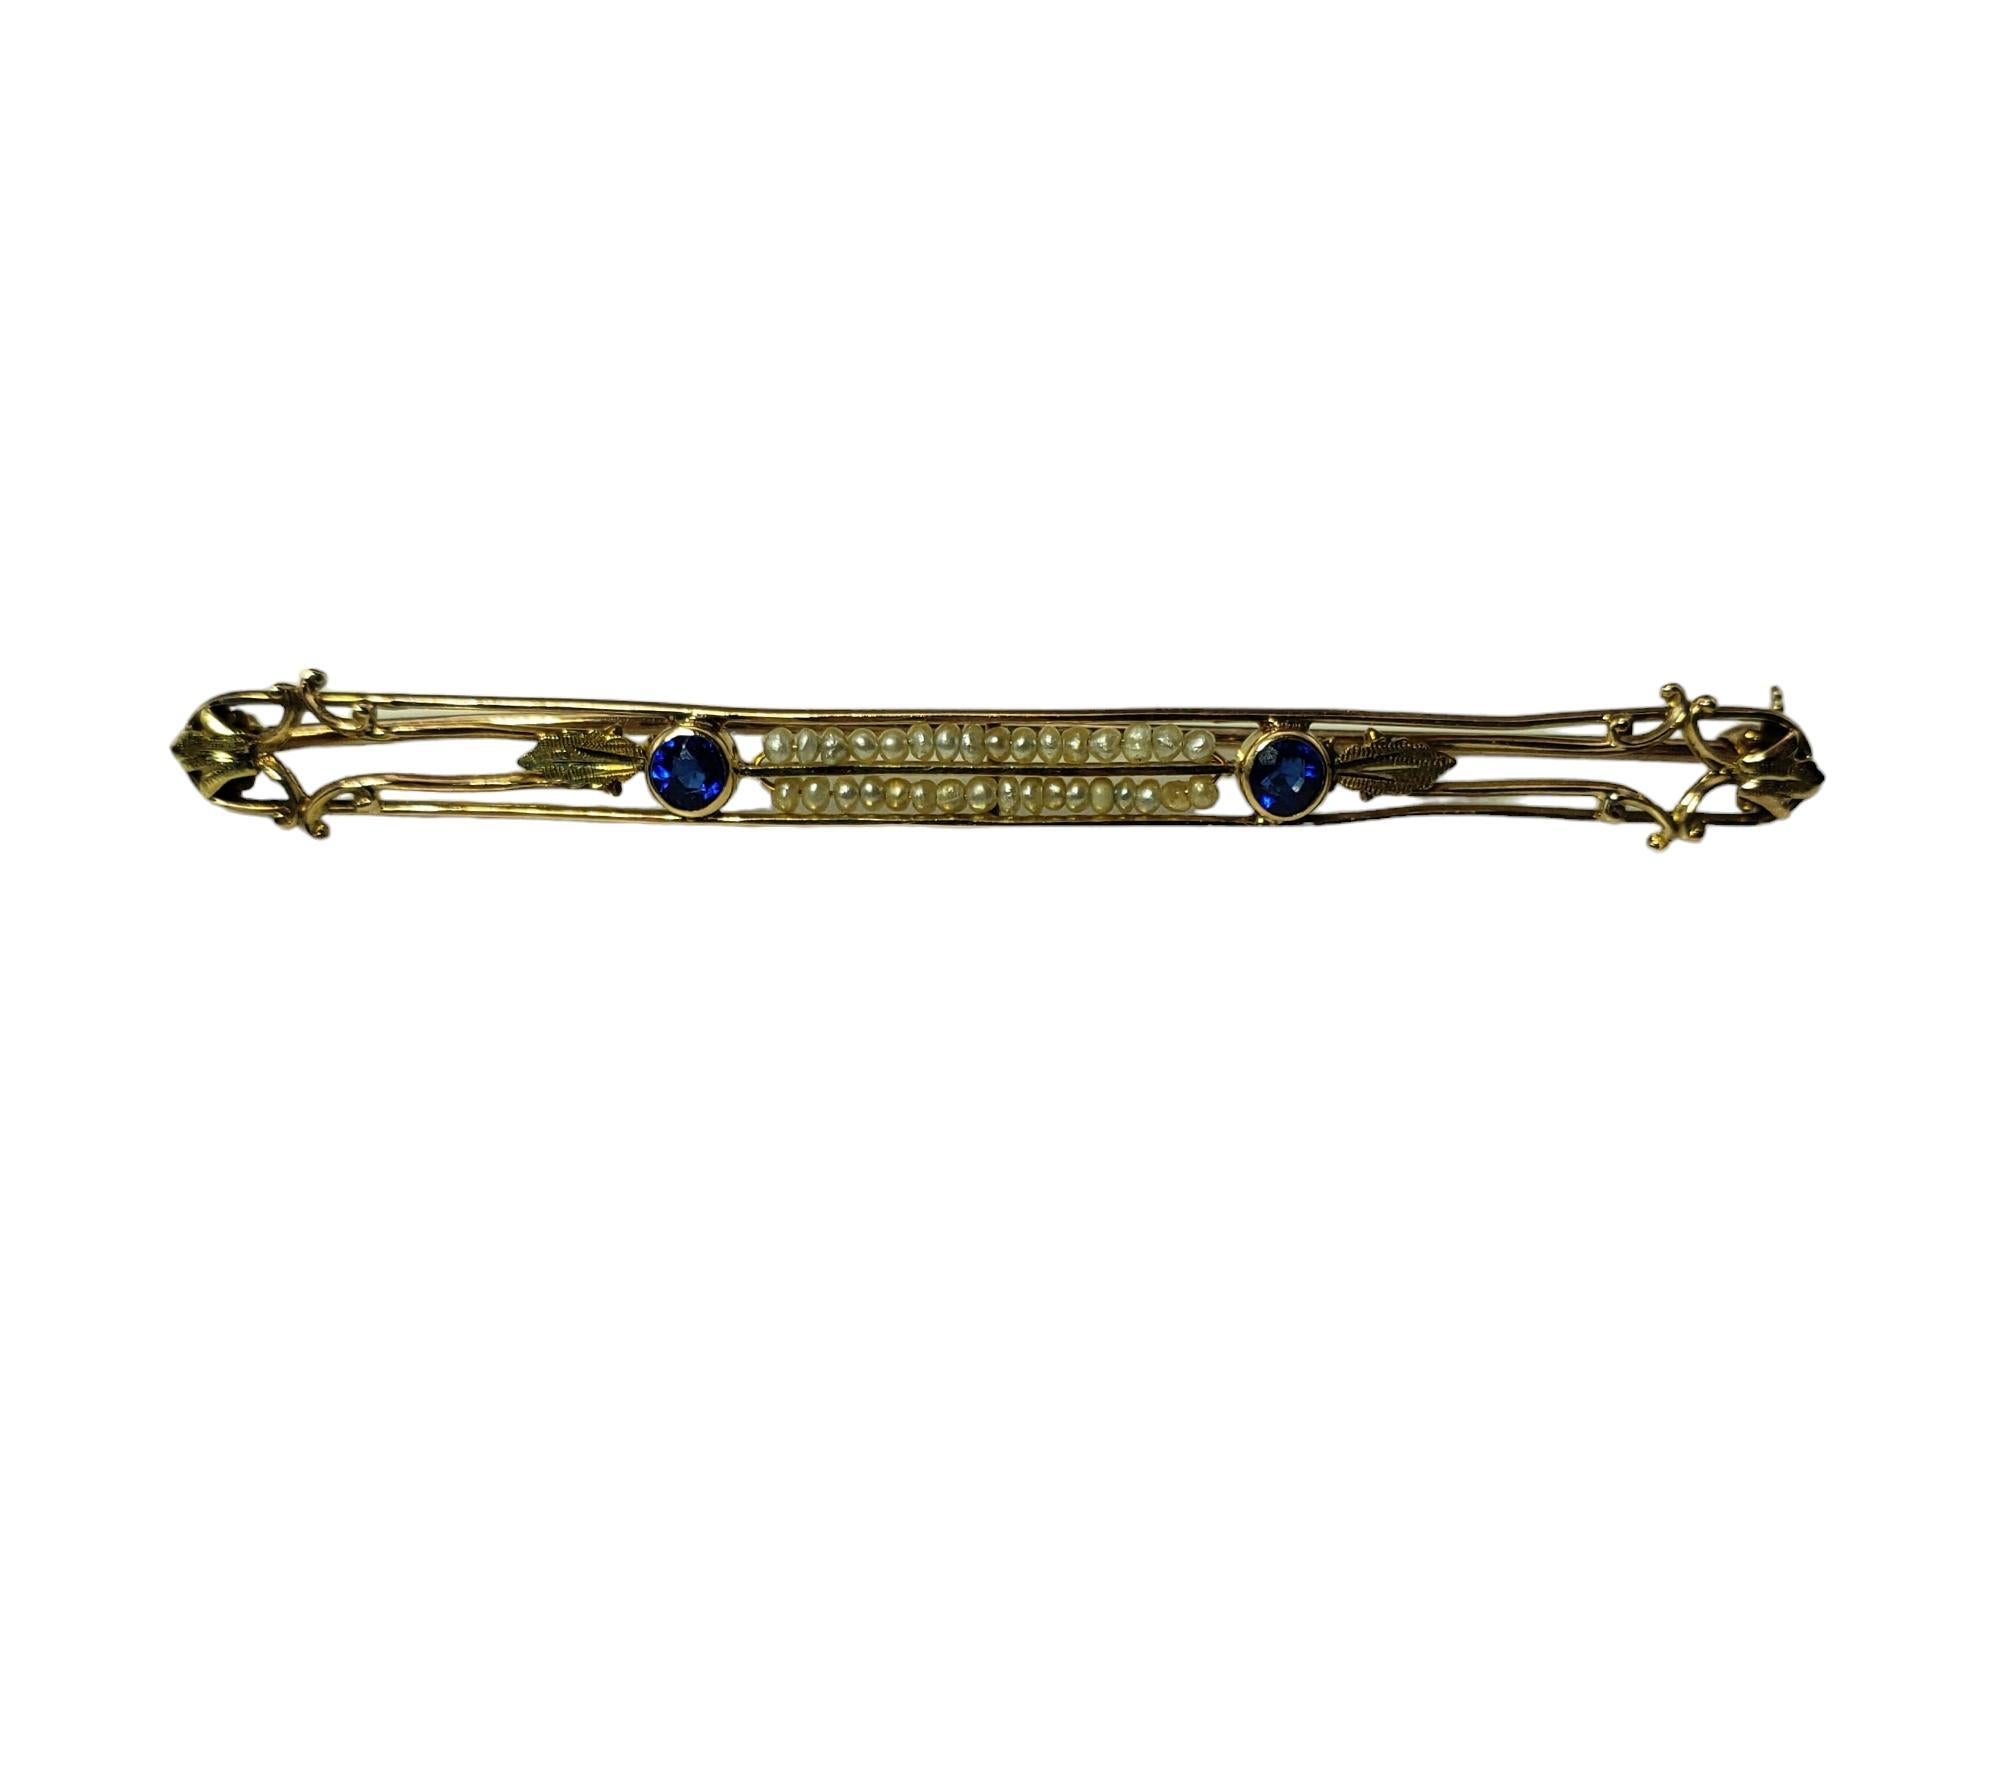 Vintage 10K Yellow Gold Blue Glass and Seed Pearl Pin-

This elegant pin is detailed with two blue glass stones and 34 seed pearls set in beautifully detailed 10K yellow gold.

Size: 64.6 mm x 4.9 mm

Stamped: MARATHON 10K

Weight: 2.6 gr./ 1.6